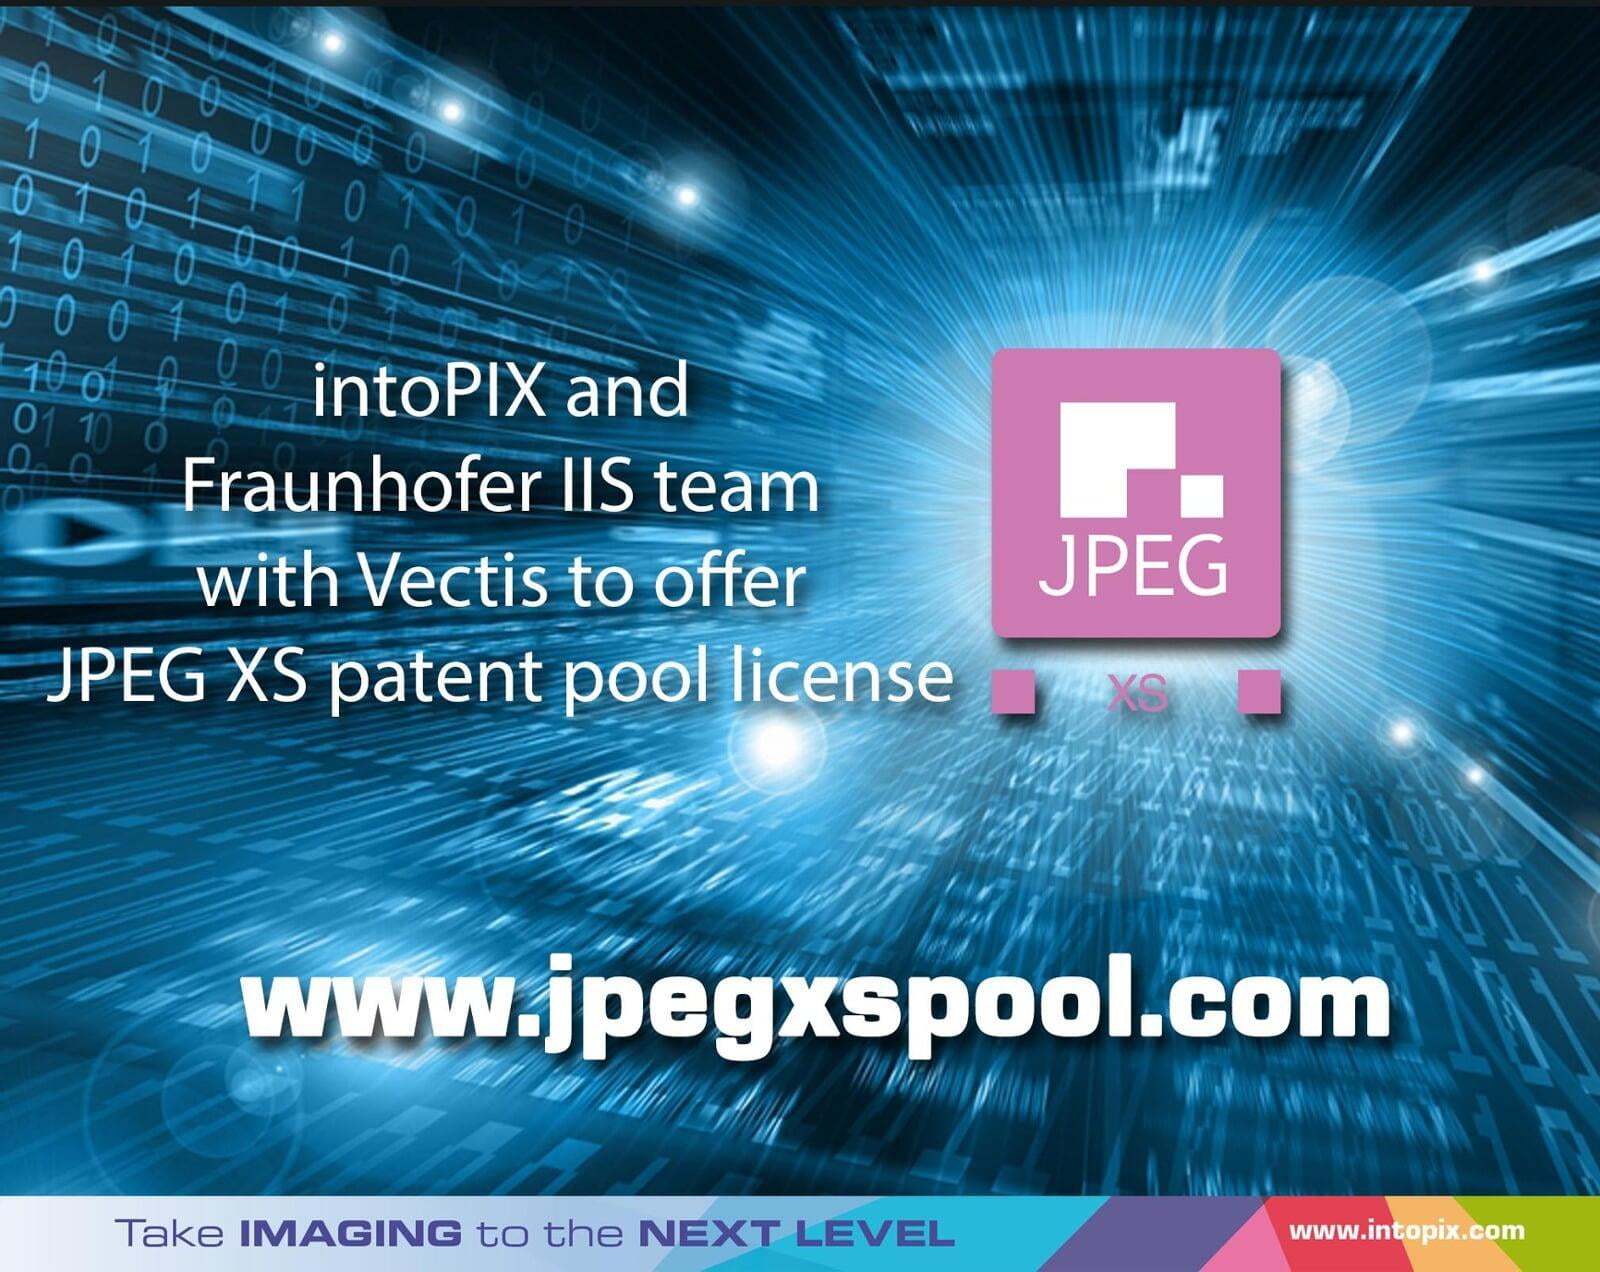 intoPIX and Fraunhofer IIS team with Vectis to offer JPEG XS patent pool license